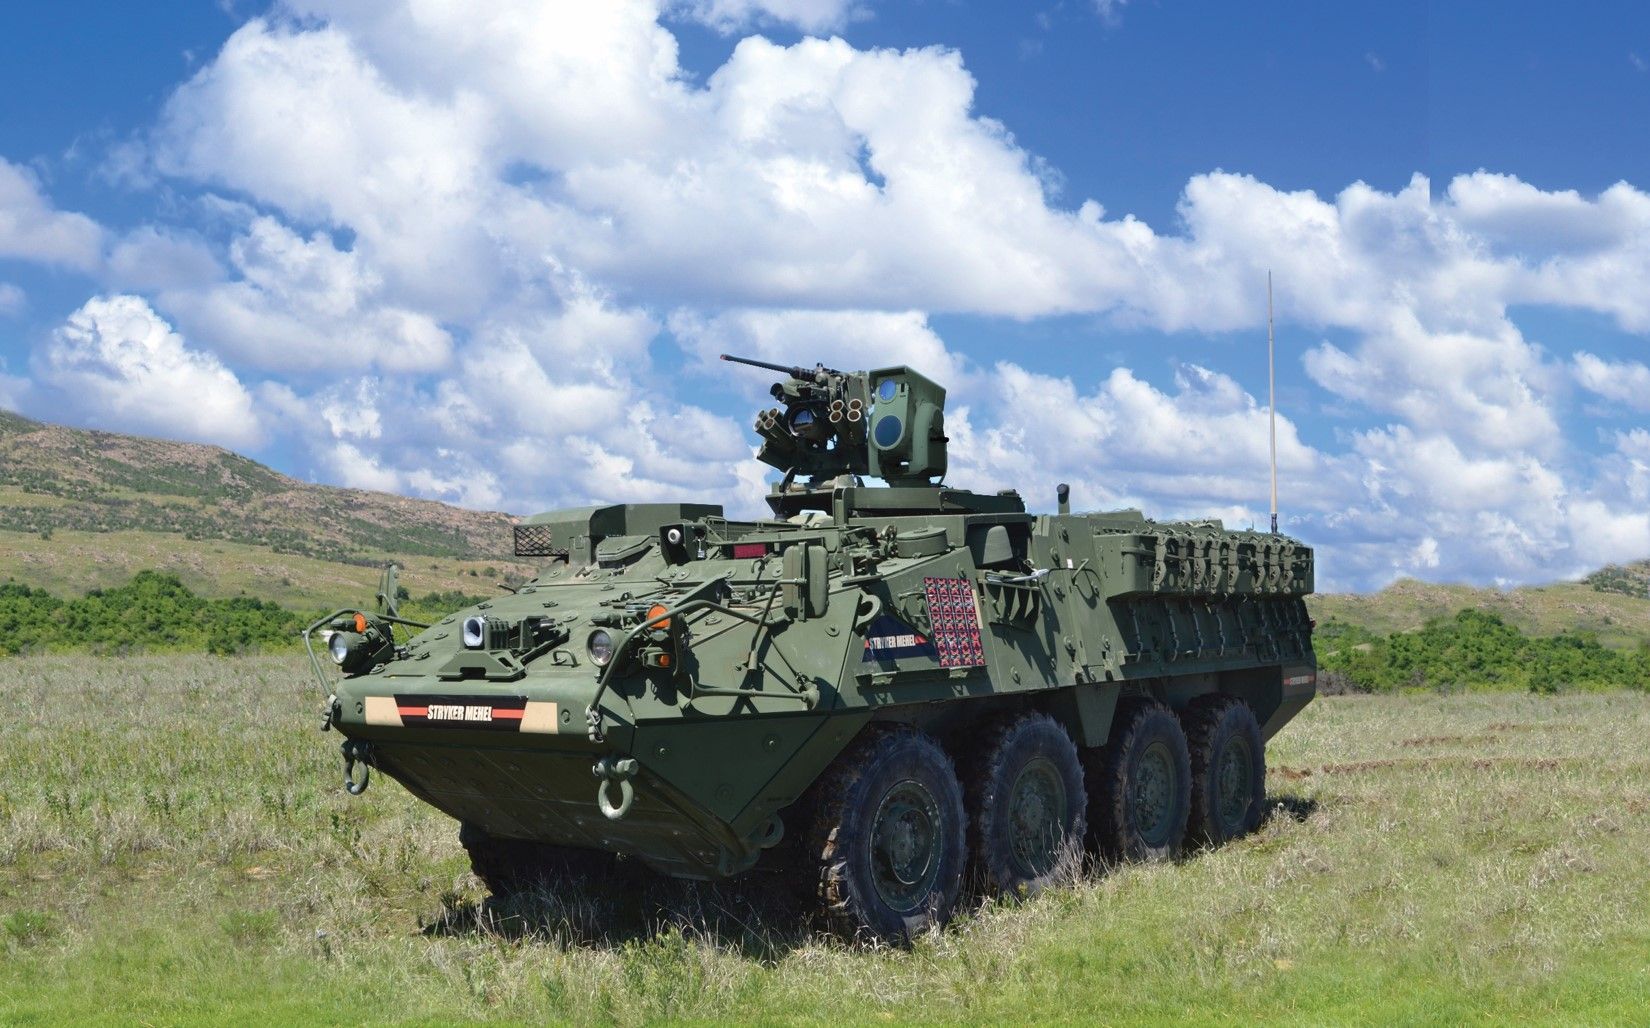 BOEING COMPACT LASER WEAPON SYSTEM ON STRYKER